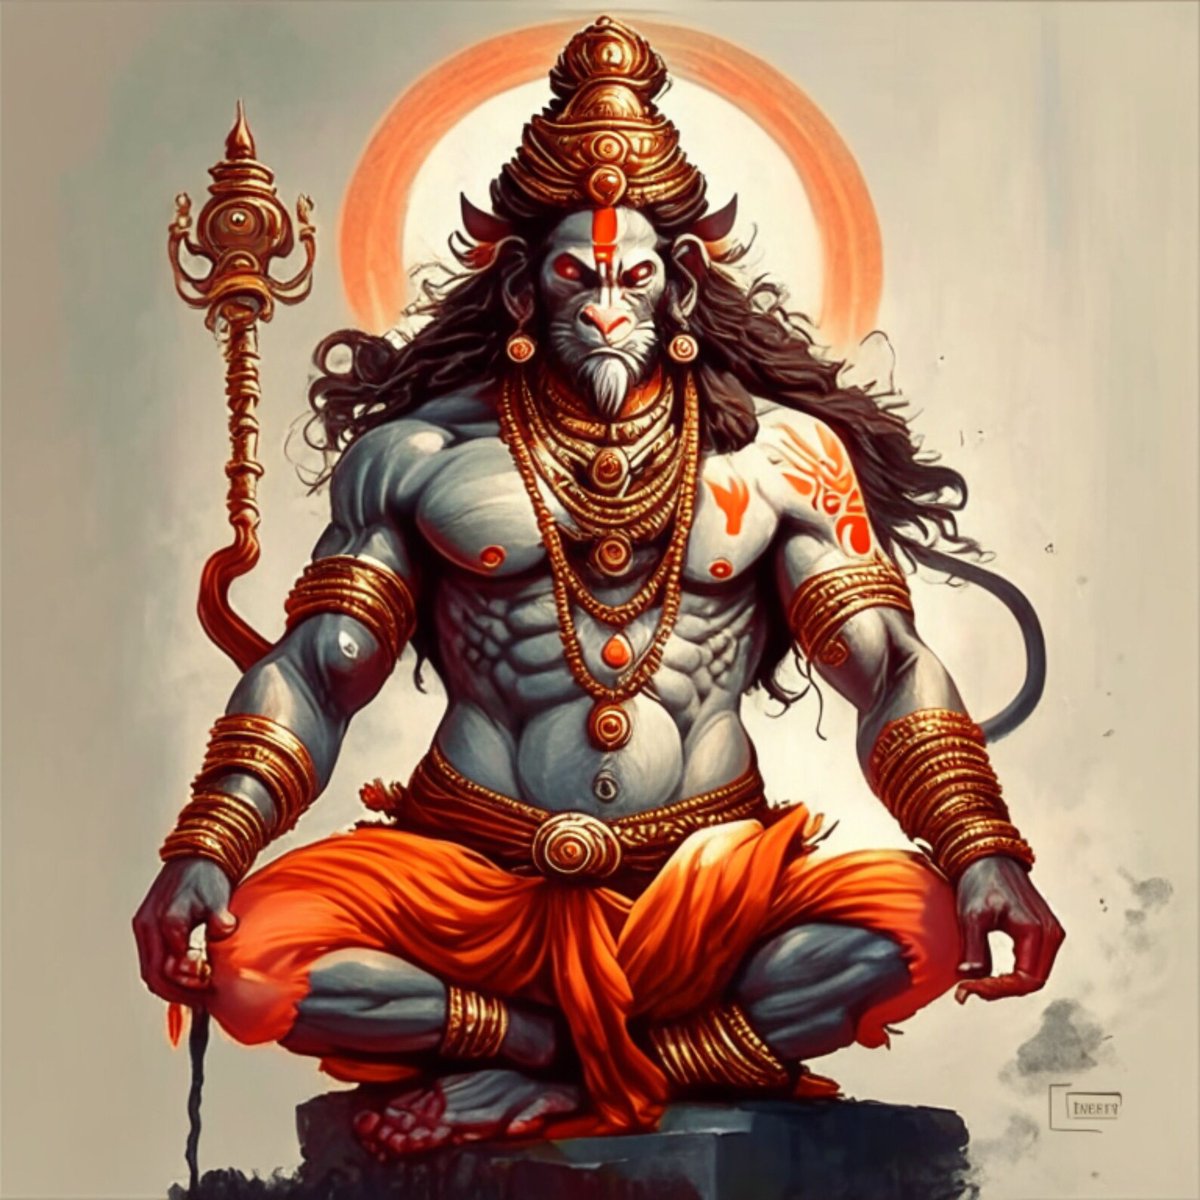 In all of the denigration of the Hindu demigod Hanuman as a 'monkey' leading a 'monkey army', the bigots have zero understanding of his significance in the Ramayana, one of the two great epics of Hinduism, the other being the Mahabharata. In fact, he's a figure of virtue,…